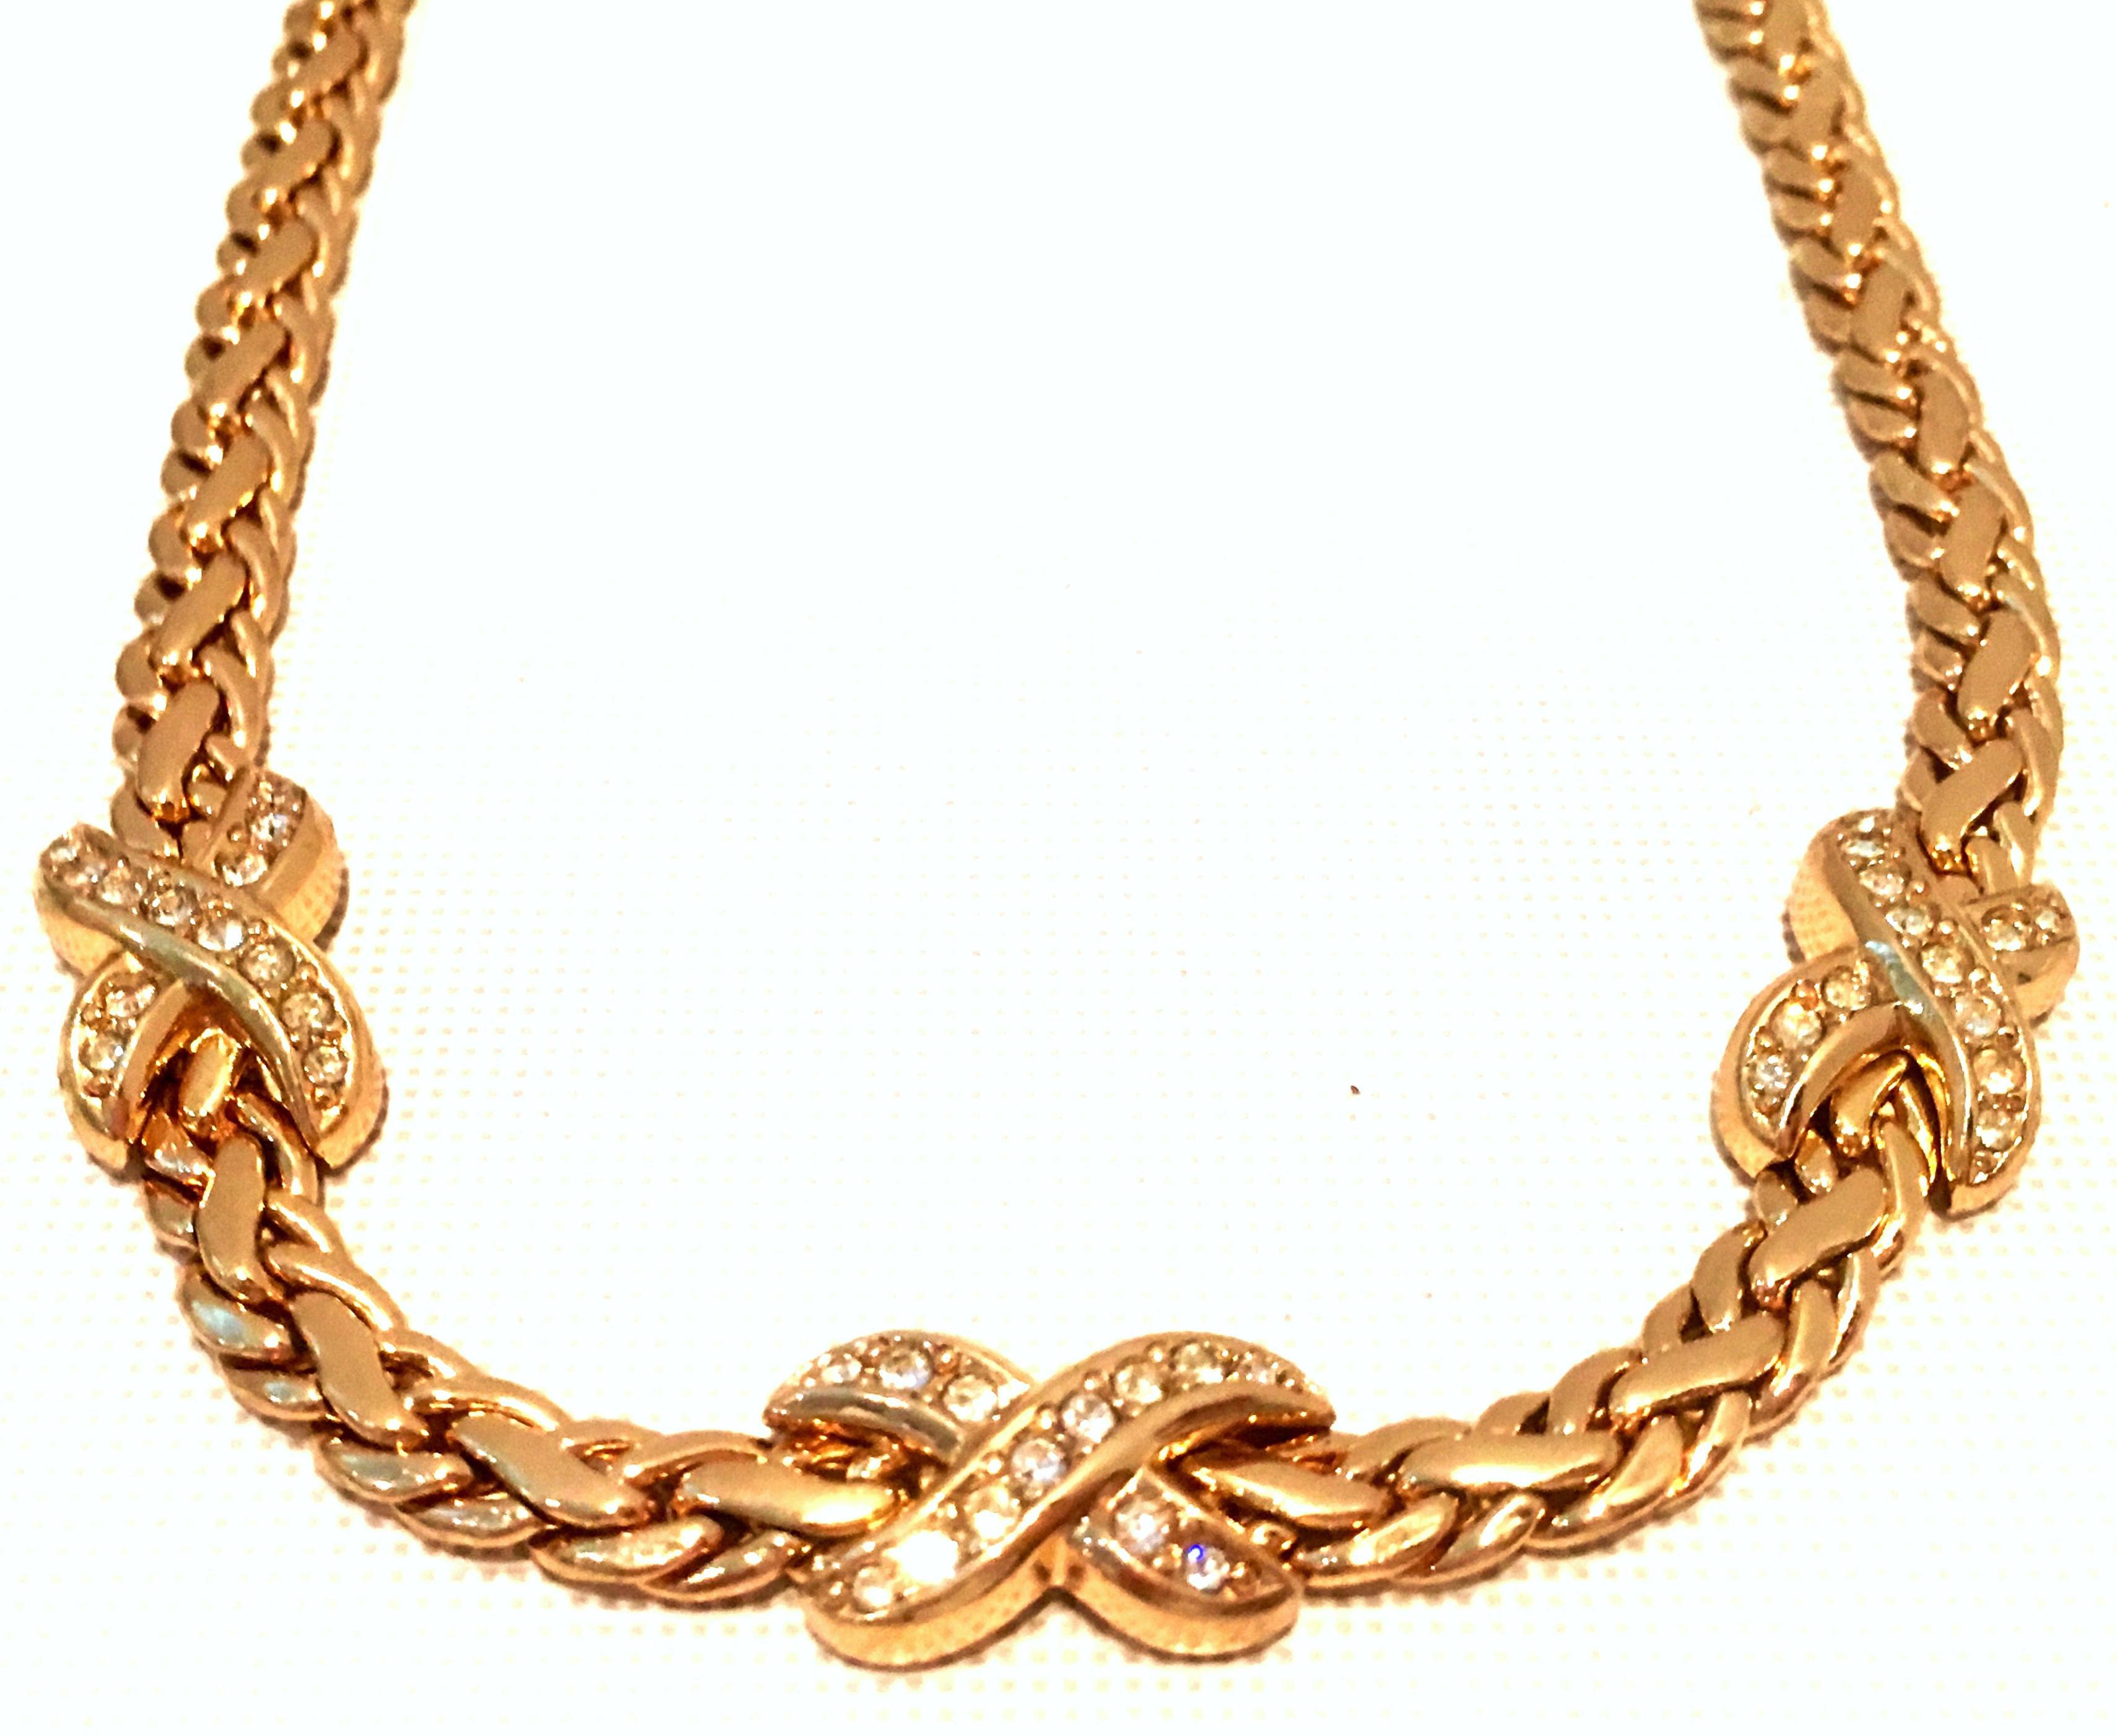 20th Century Gold & Swaorovski Crystal Choker Style Necklace By, Christian Dior 1